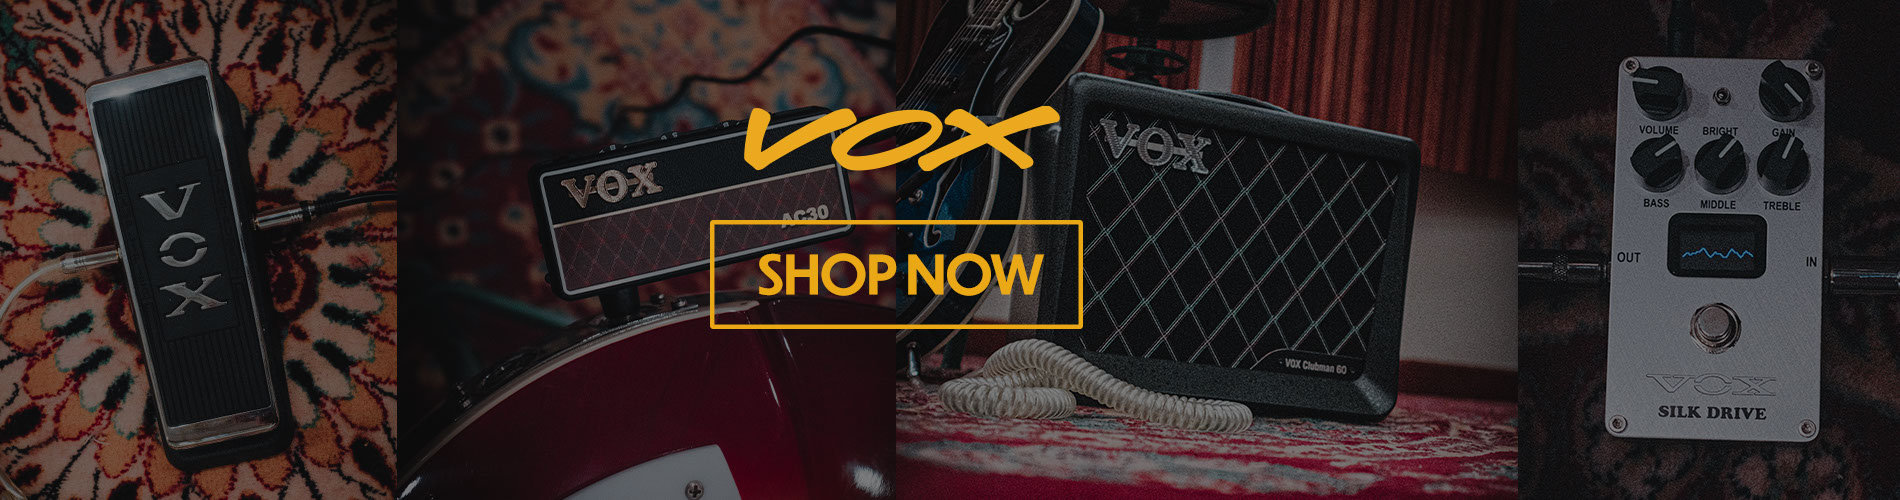 VOX pedals and amps